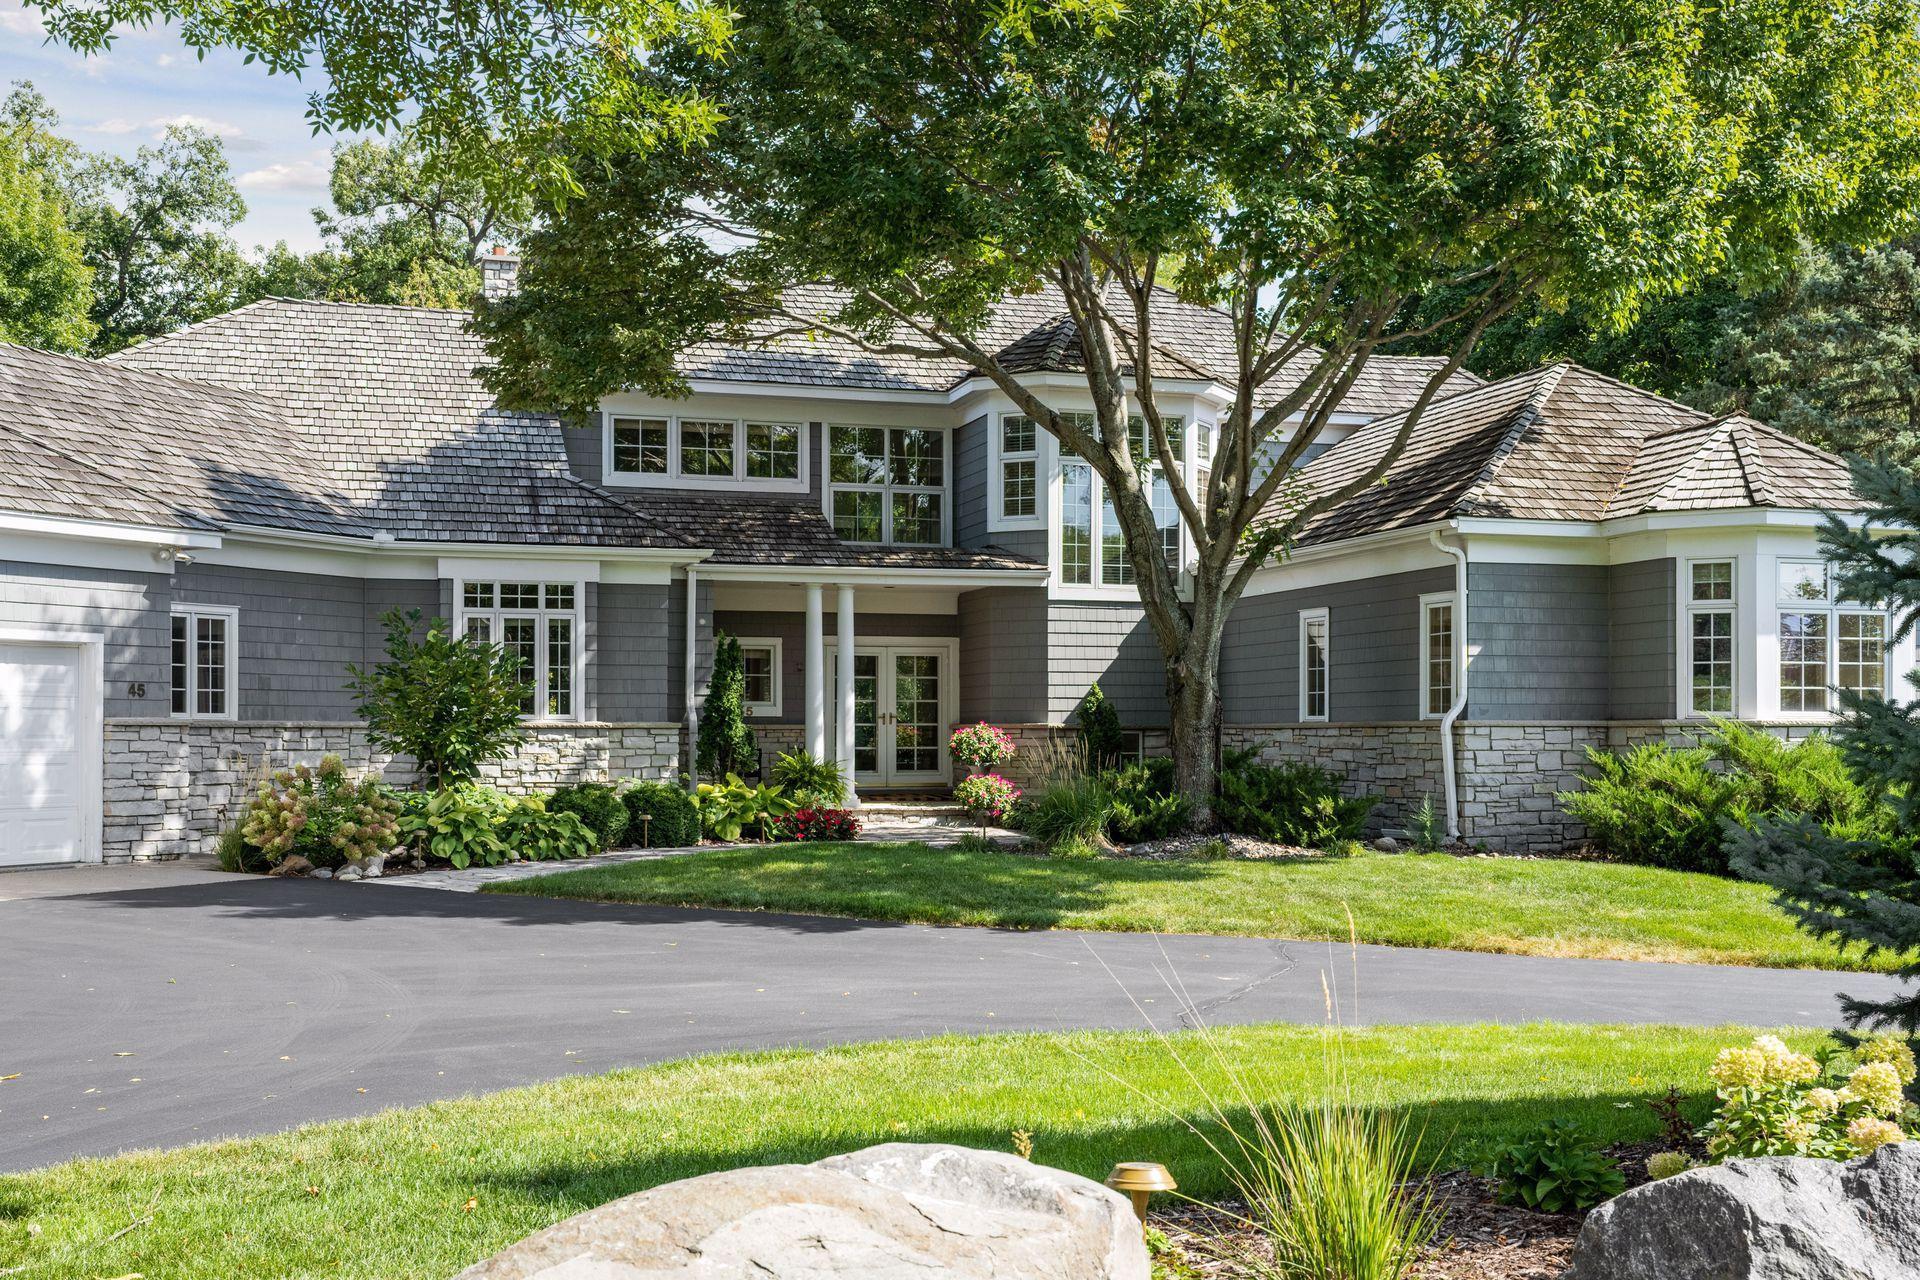 Lovely curb appeal with shake siding, cedar shake roof, and perfect landscaping.